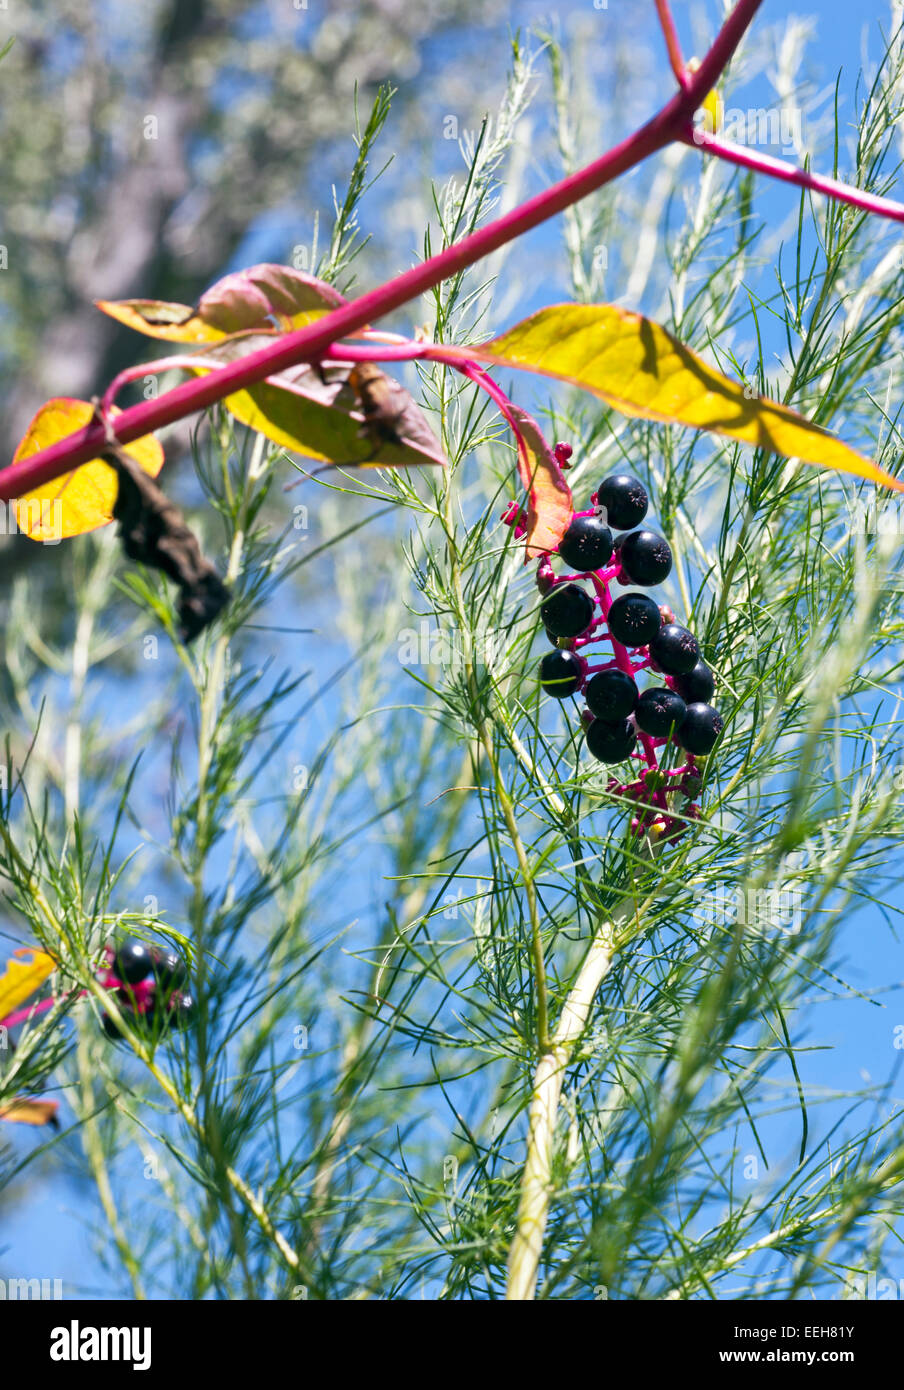 Pokeberries on a pokeberry plant is a weed commonly found in the eastern US. (Phytolacca americana) Stock Photo